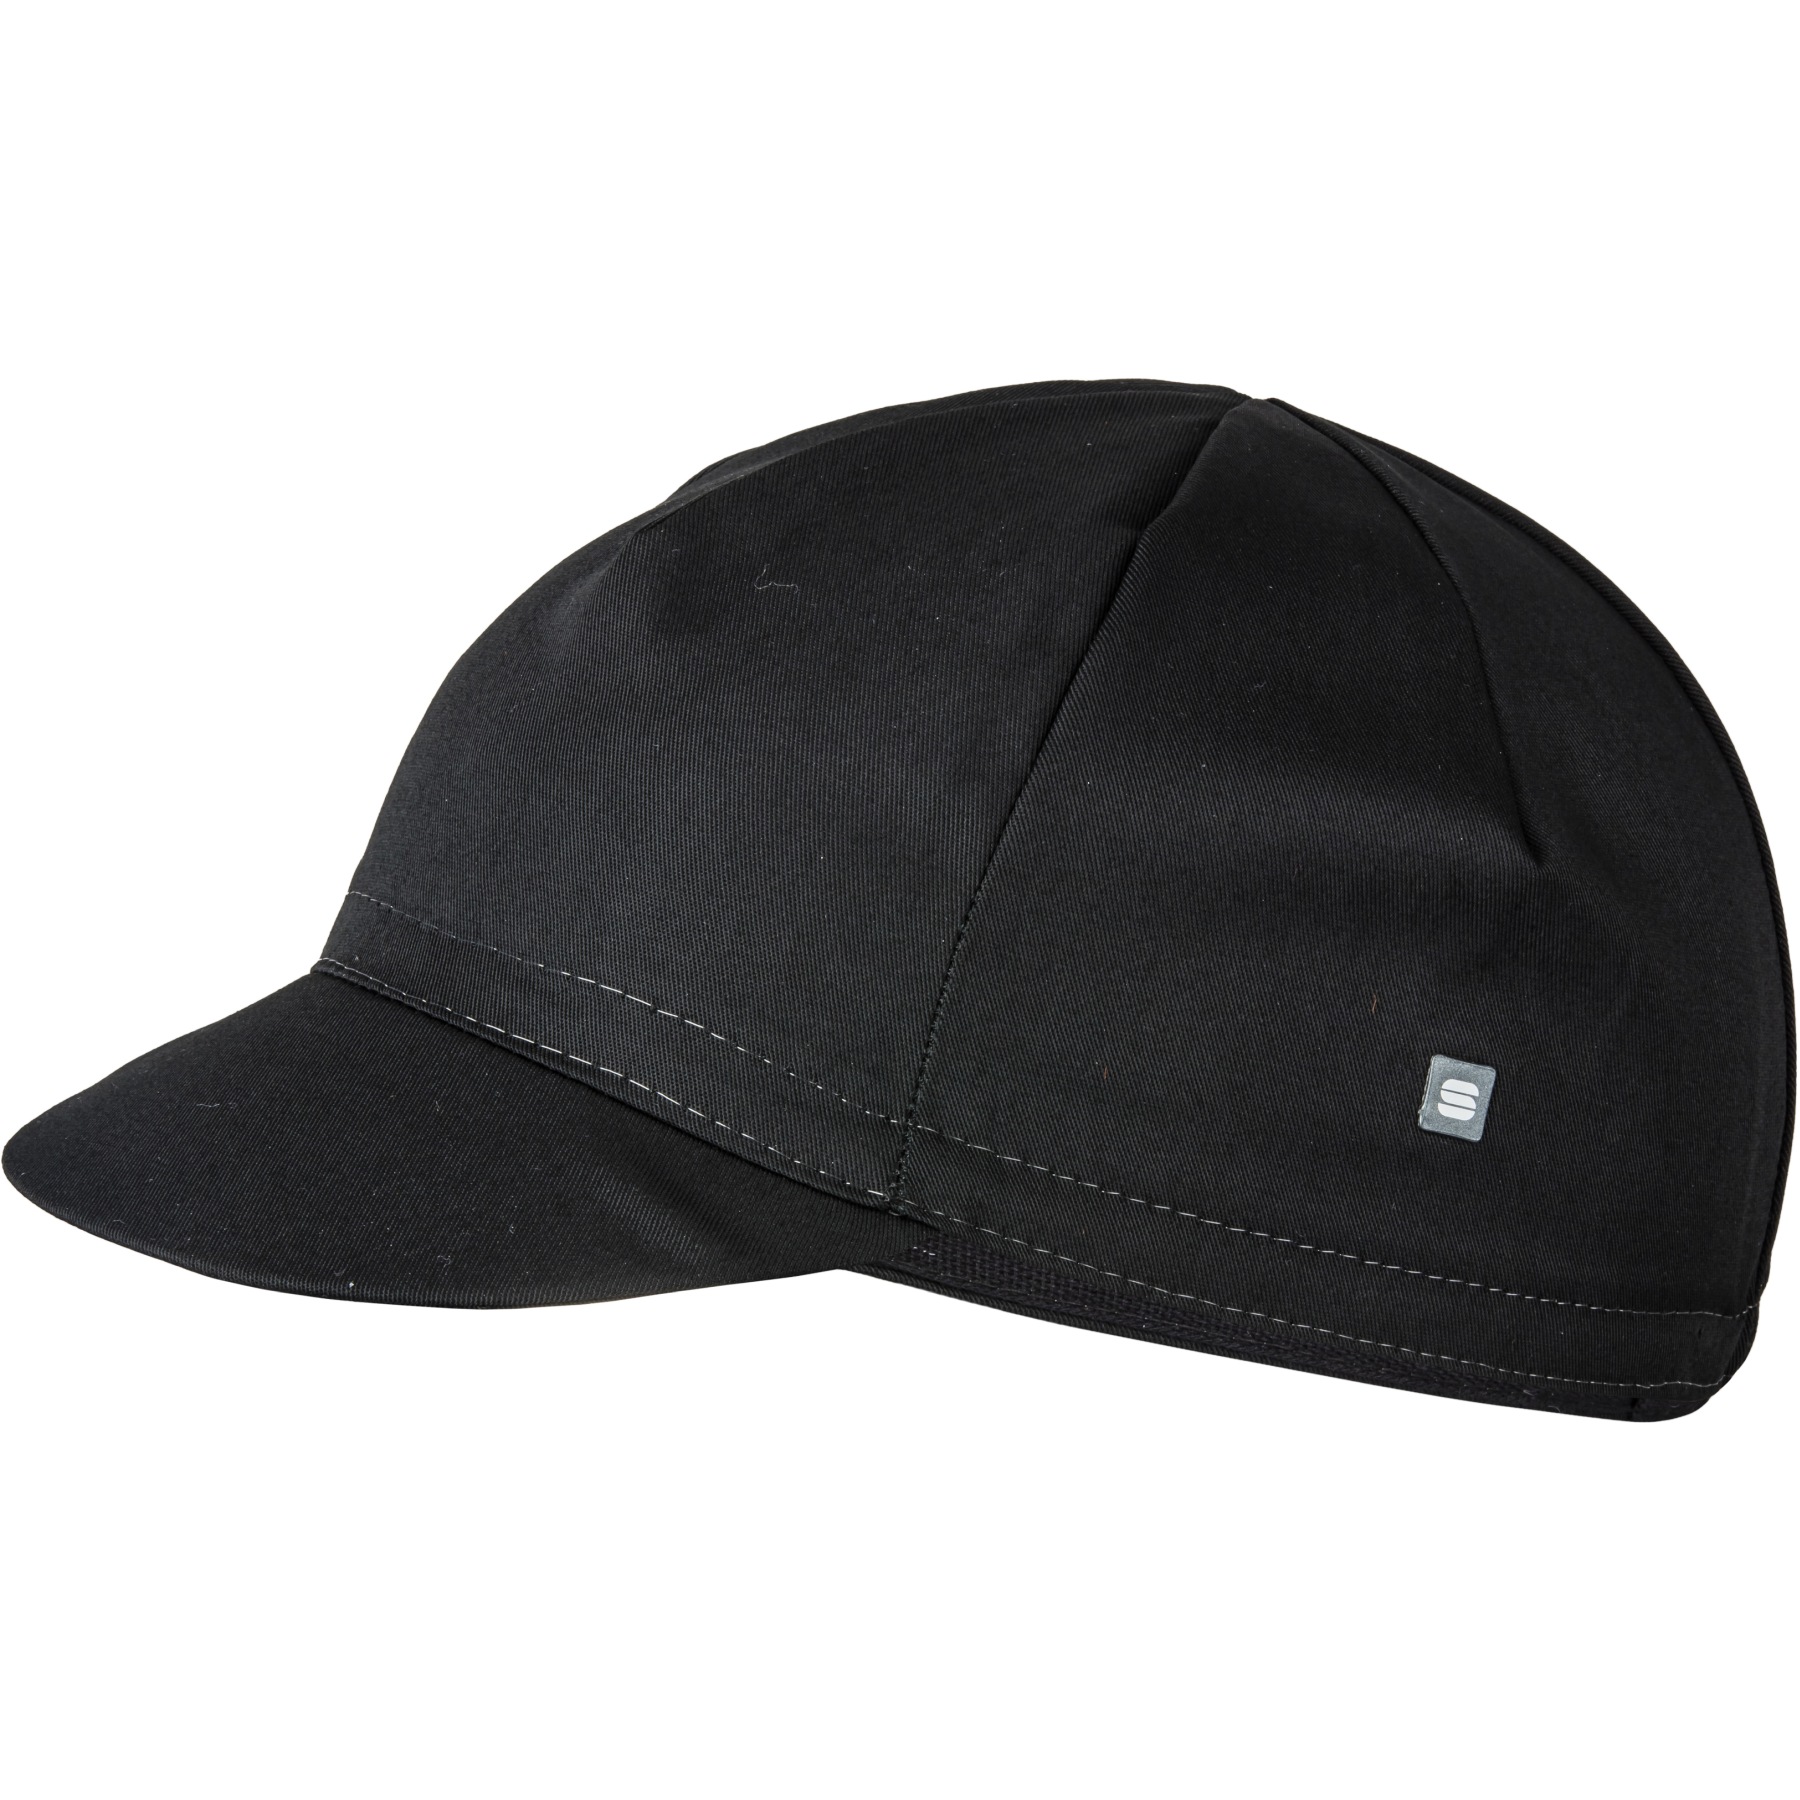 Picture of Sportful Matchy Cycling Cap - 002 Black